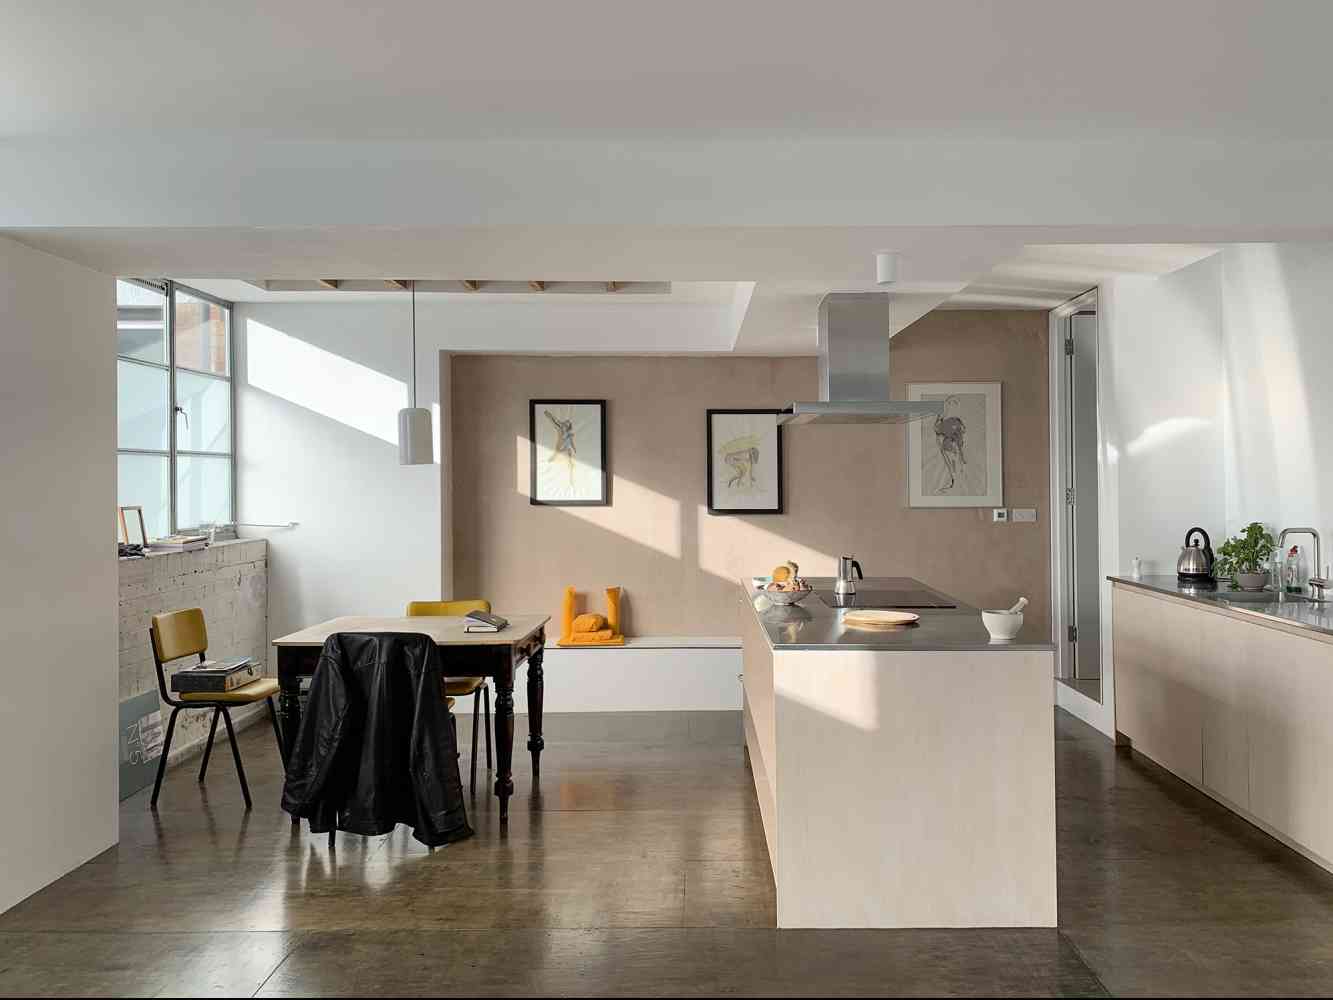 Princelet Street - The refurbishment of an apartment in a warehouse building in Spitalfields, East London, 2020